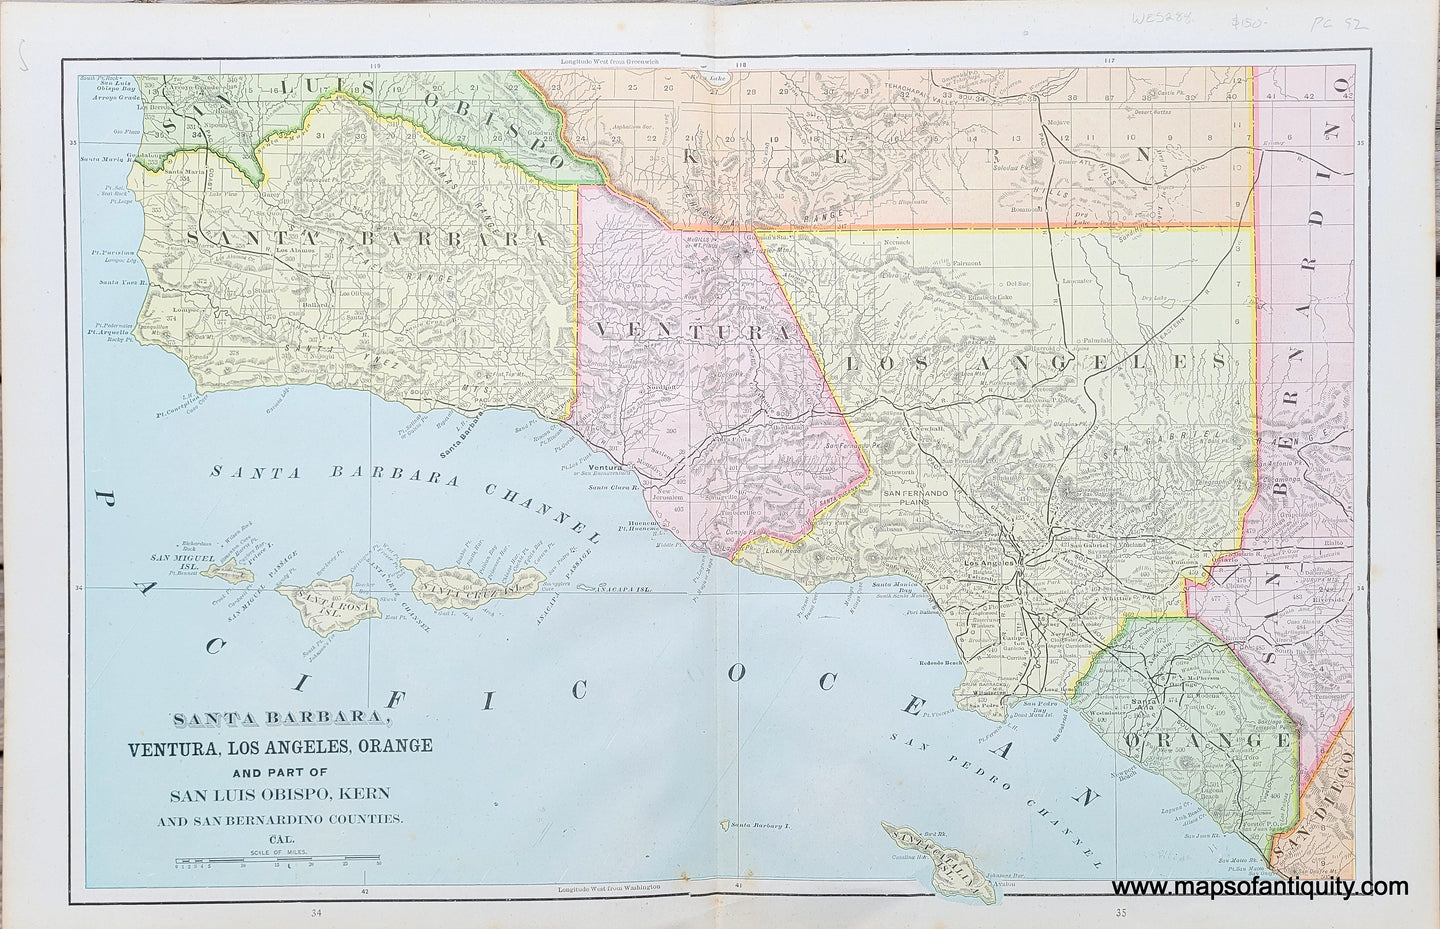 Antique-Map-California-Santa-Barbara-Ventura-Los-Angeles-Orange-and-Part-of-San-Luis-Obispo-Kern-and-San-Bernardino-Counties-Cal.-County-Home-Library-and-Supply-Association-Pacific-Coast-1892-1890s-1800s-Late-19th-Century-Maps-of-Antiquity-